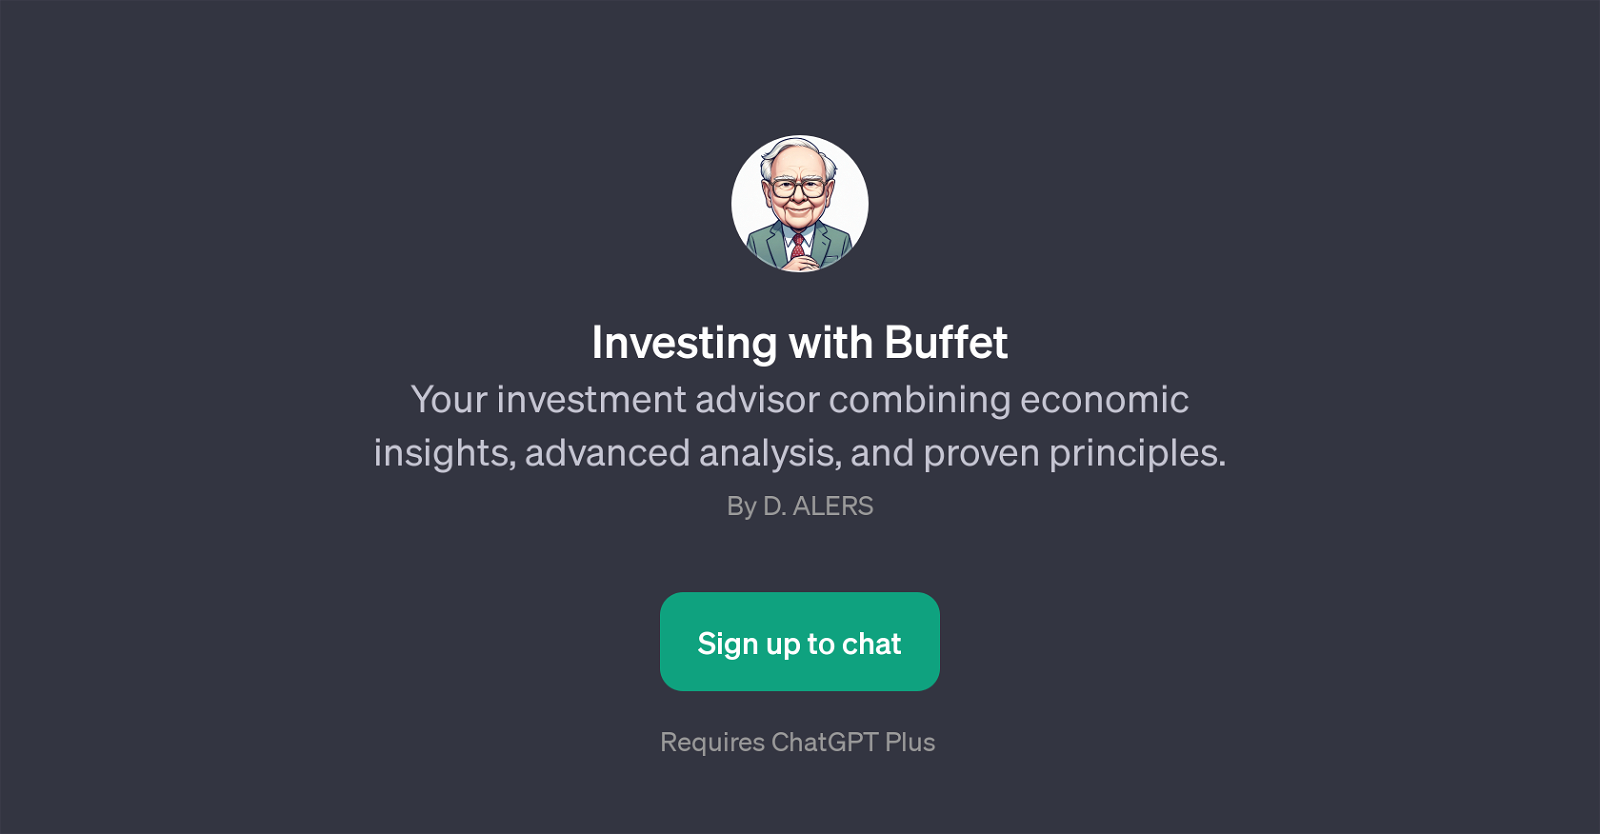 Investing with Buffet website